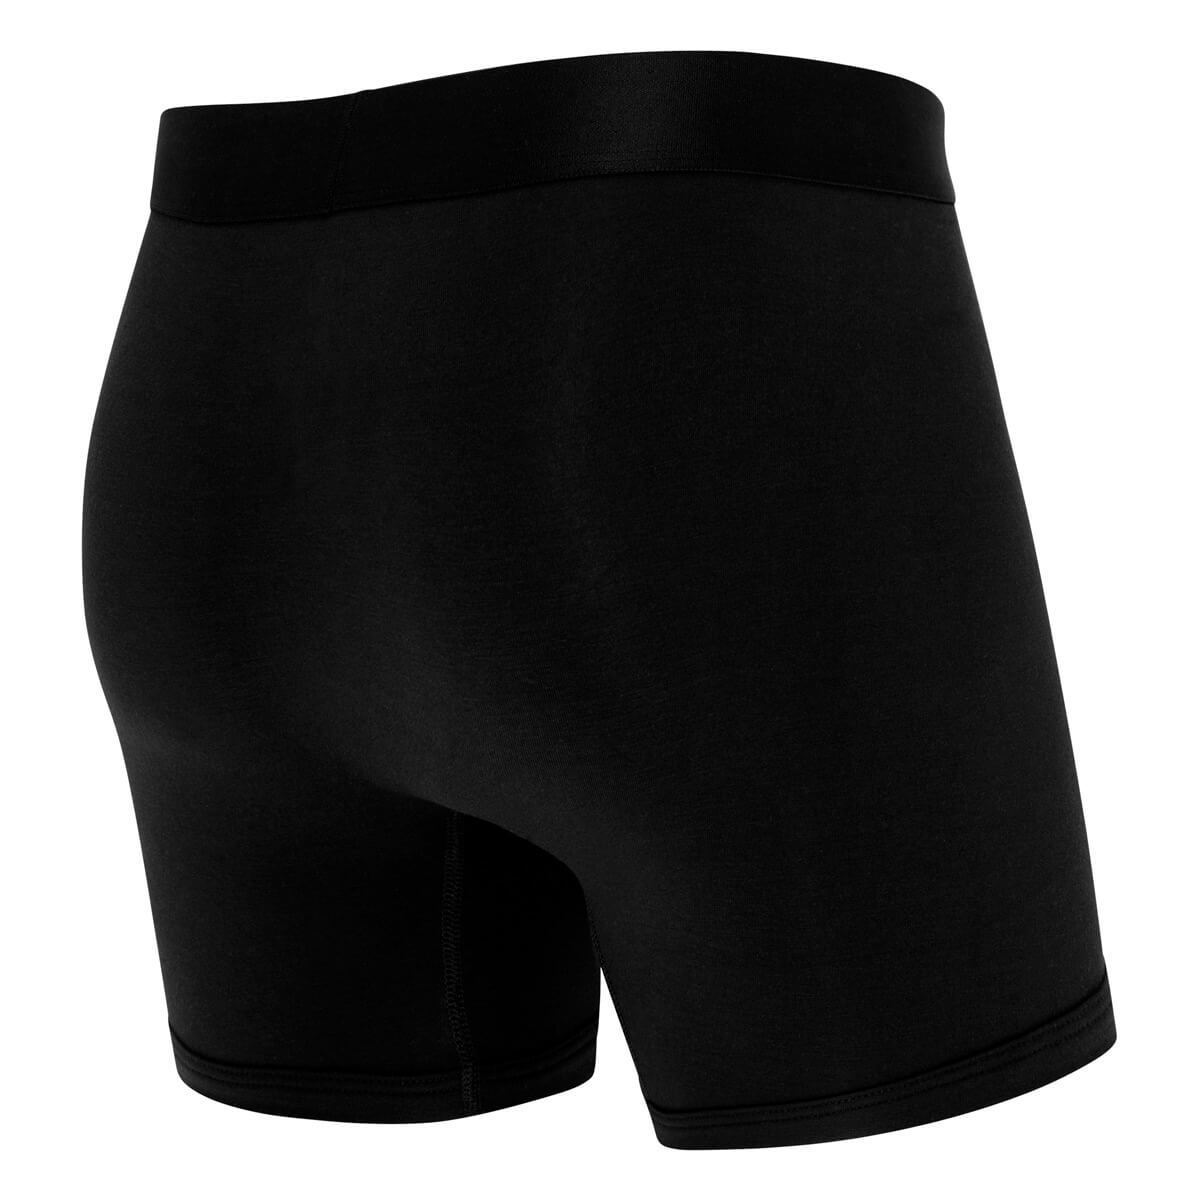 Mens Boxer Briefs Underwear Subscription - Join The Club!